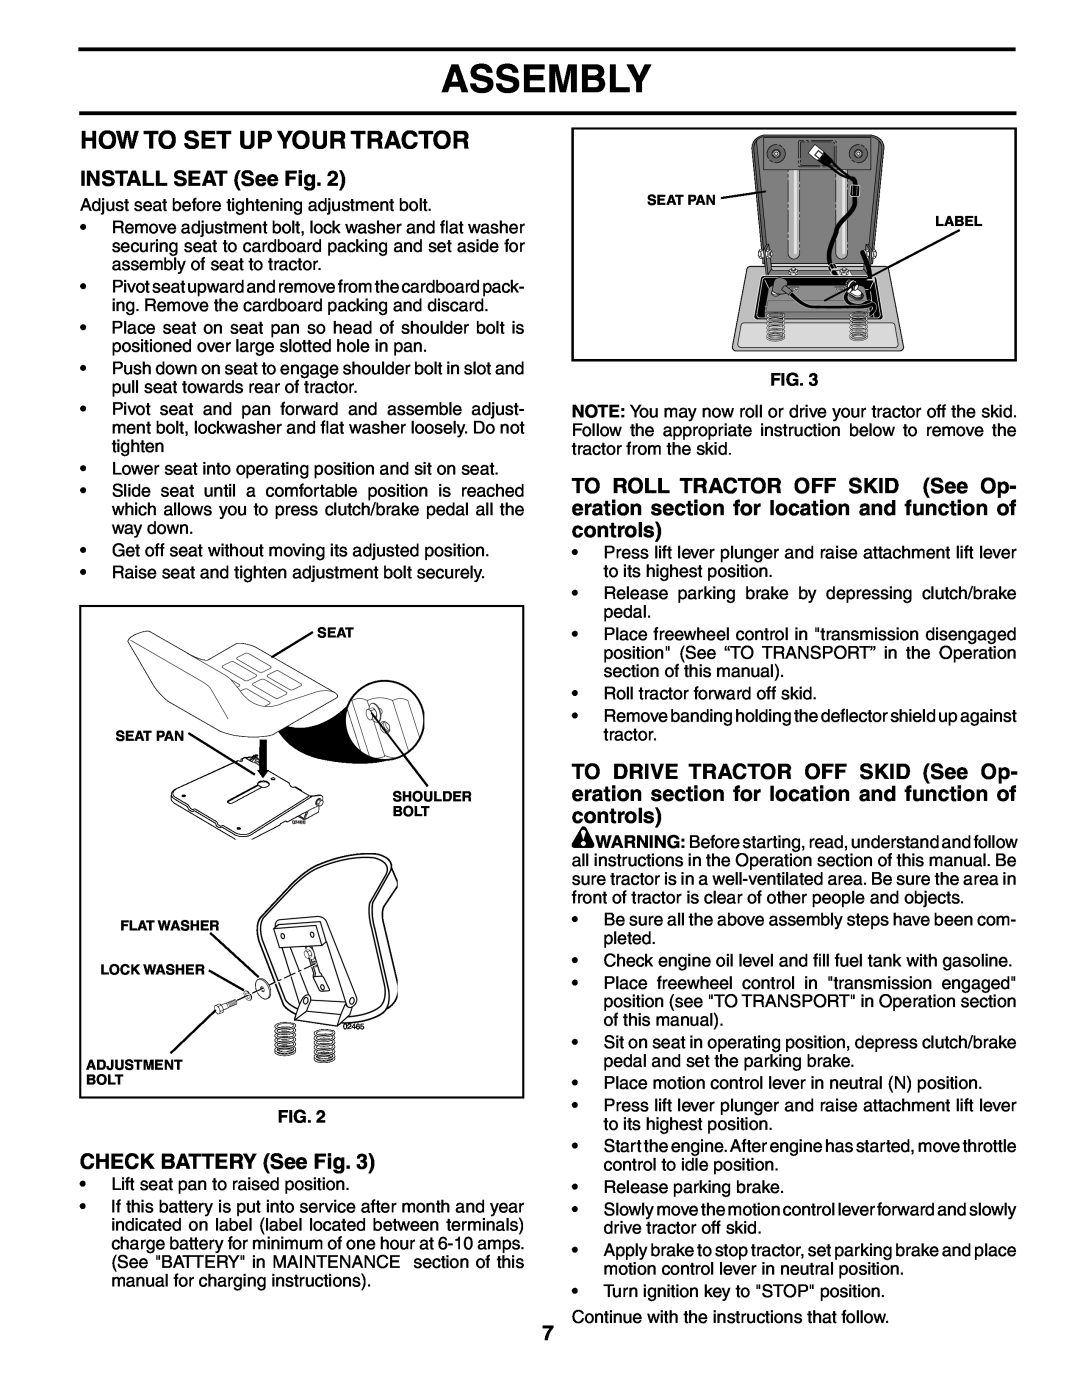 Poulan 191984 manual How To Set Up Your Tractor, INSTALL SEAT See Fig, CHECK BATTERY See Fig, Assembly 